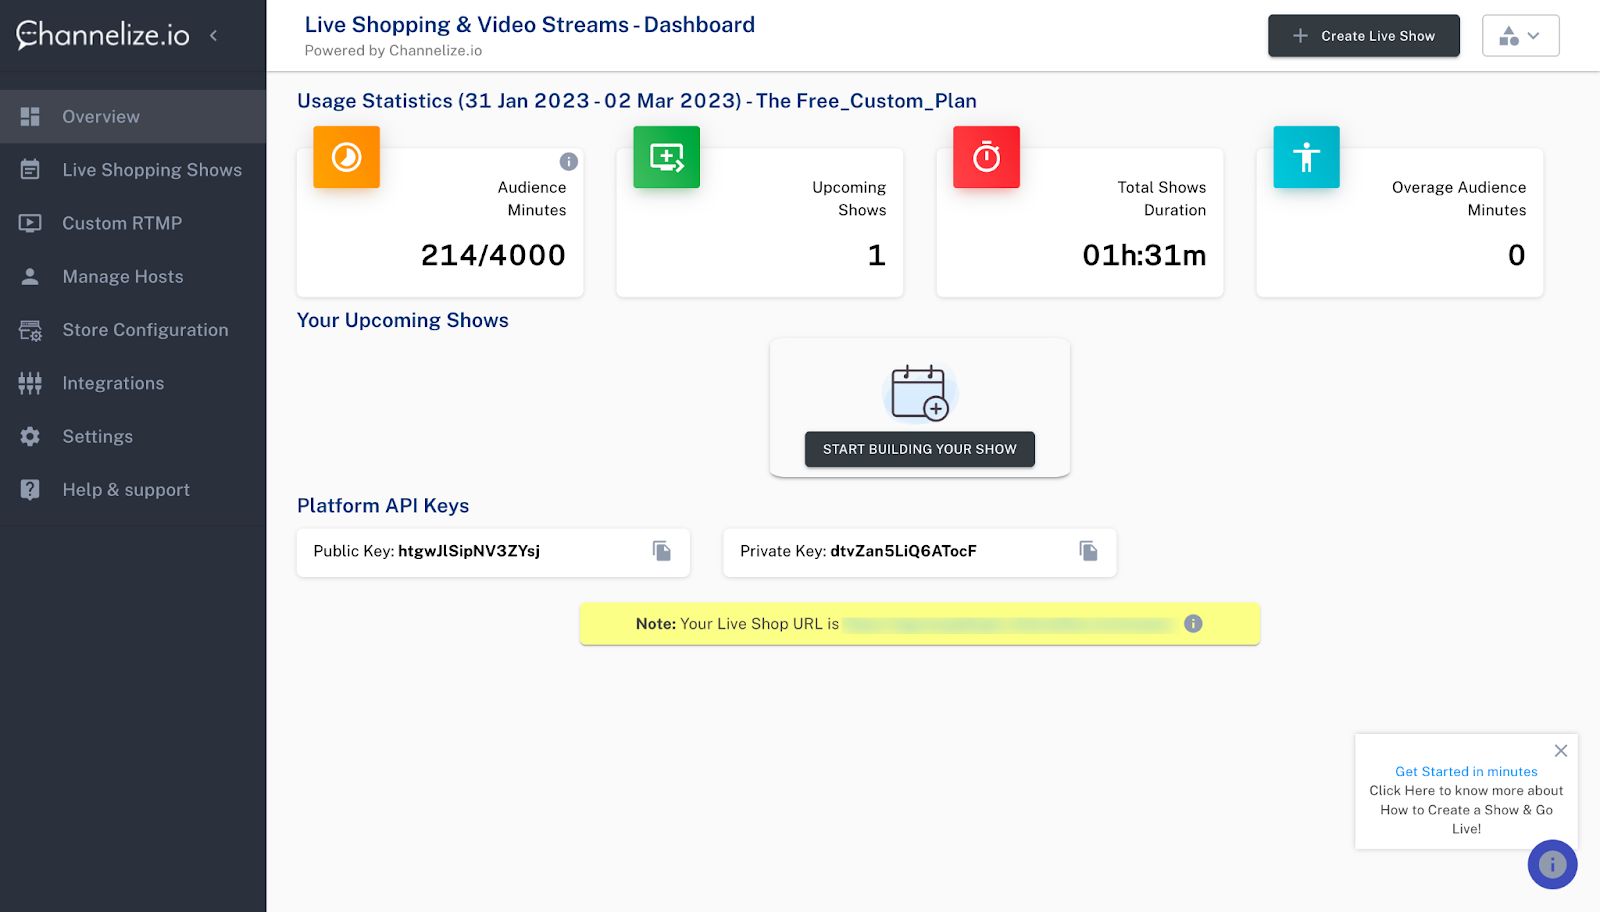 Live Shop URL Link in the Production Dashboard